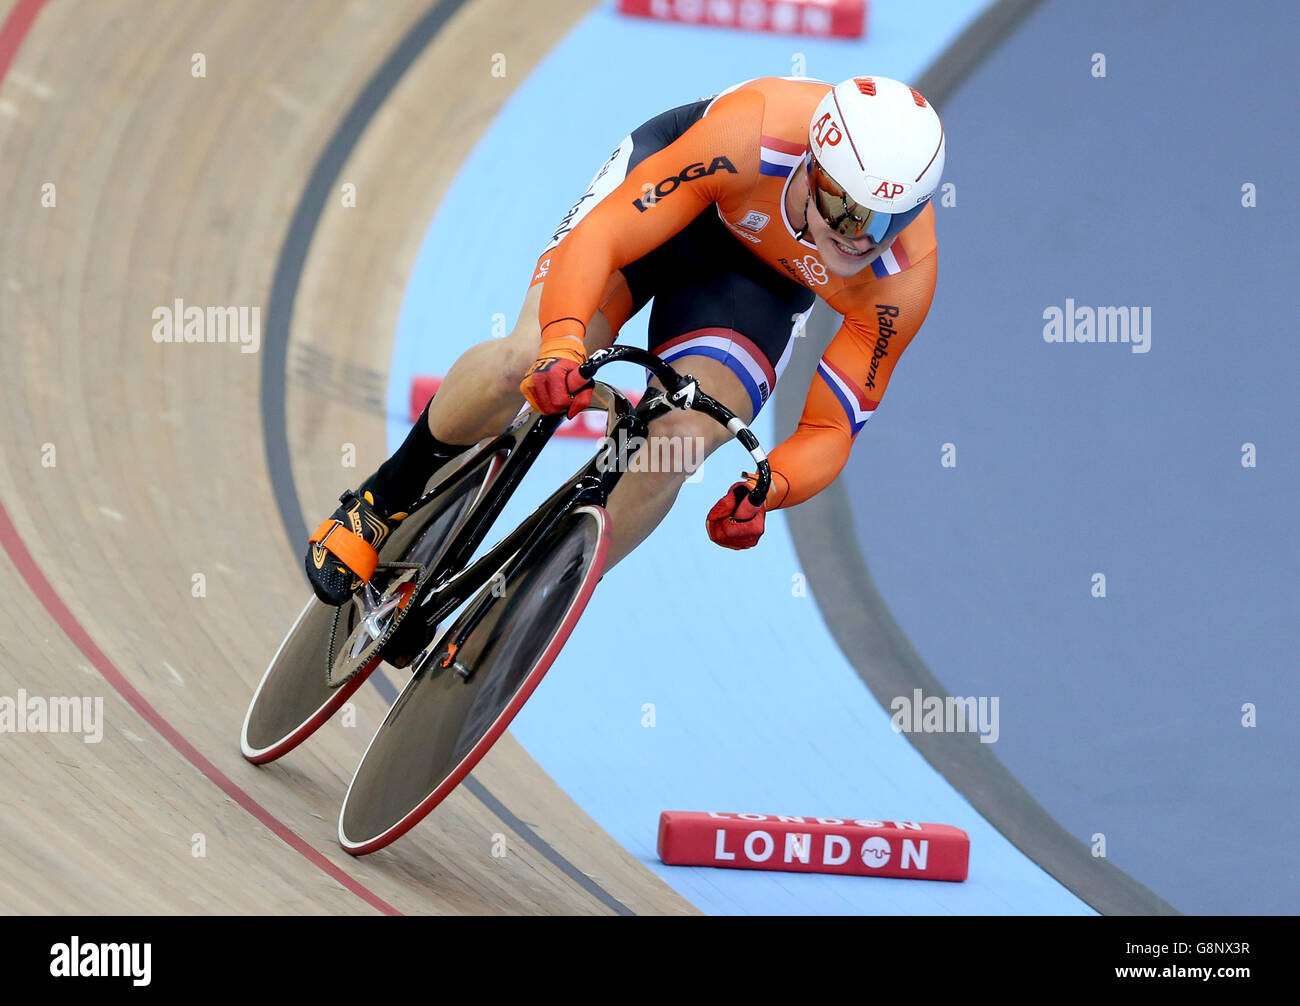 The Netherland's Jeffrey Hoogland competes in the Men's Sprint during day three of the UCI Track Cycling World Championships at Lee Valley VeloPark, London. PRESS ASSOCIATION Photo. Picture date: Friday March 4, 2016. See PA story CYCLING World. Photo credit should read: Tim Goode/PA Wire. Stock Photo